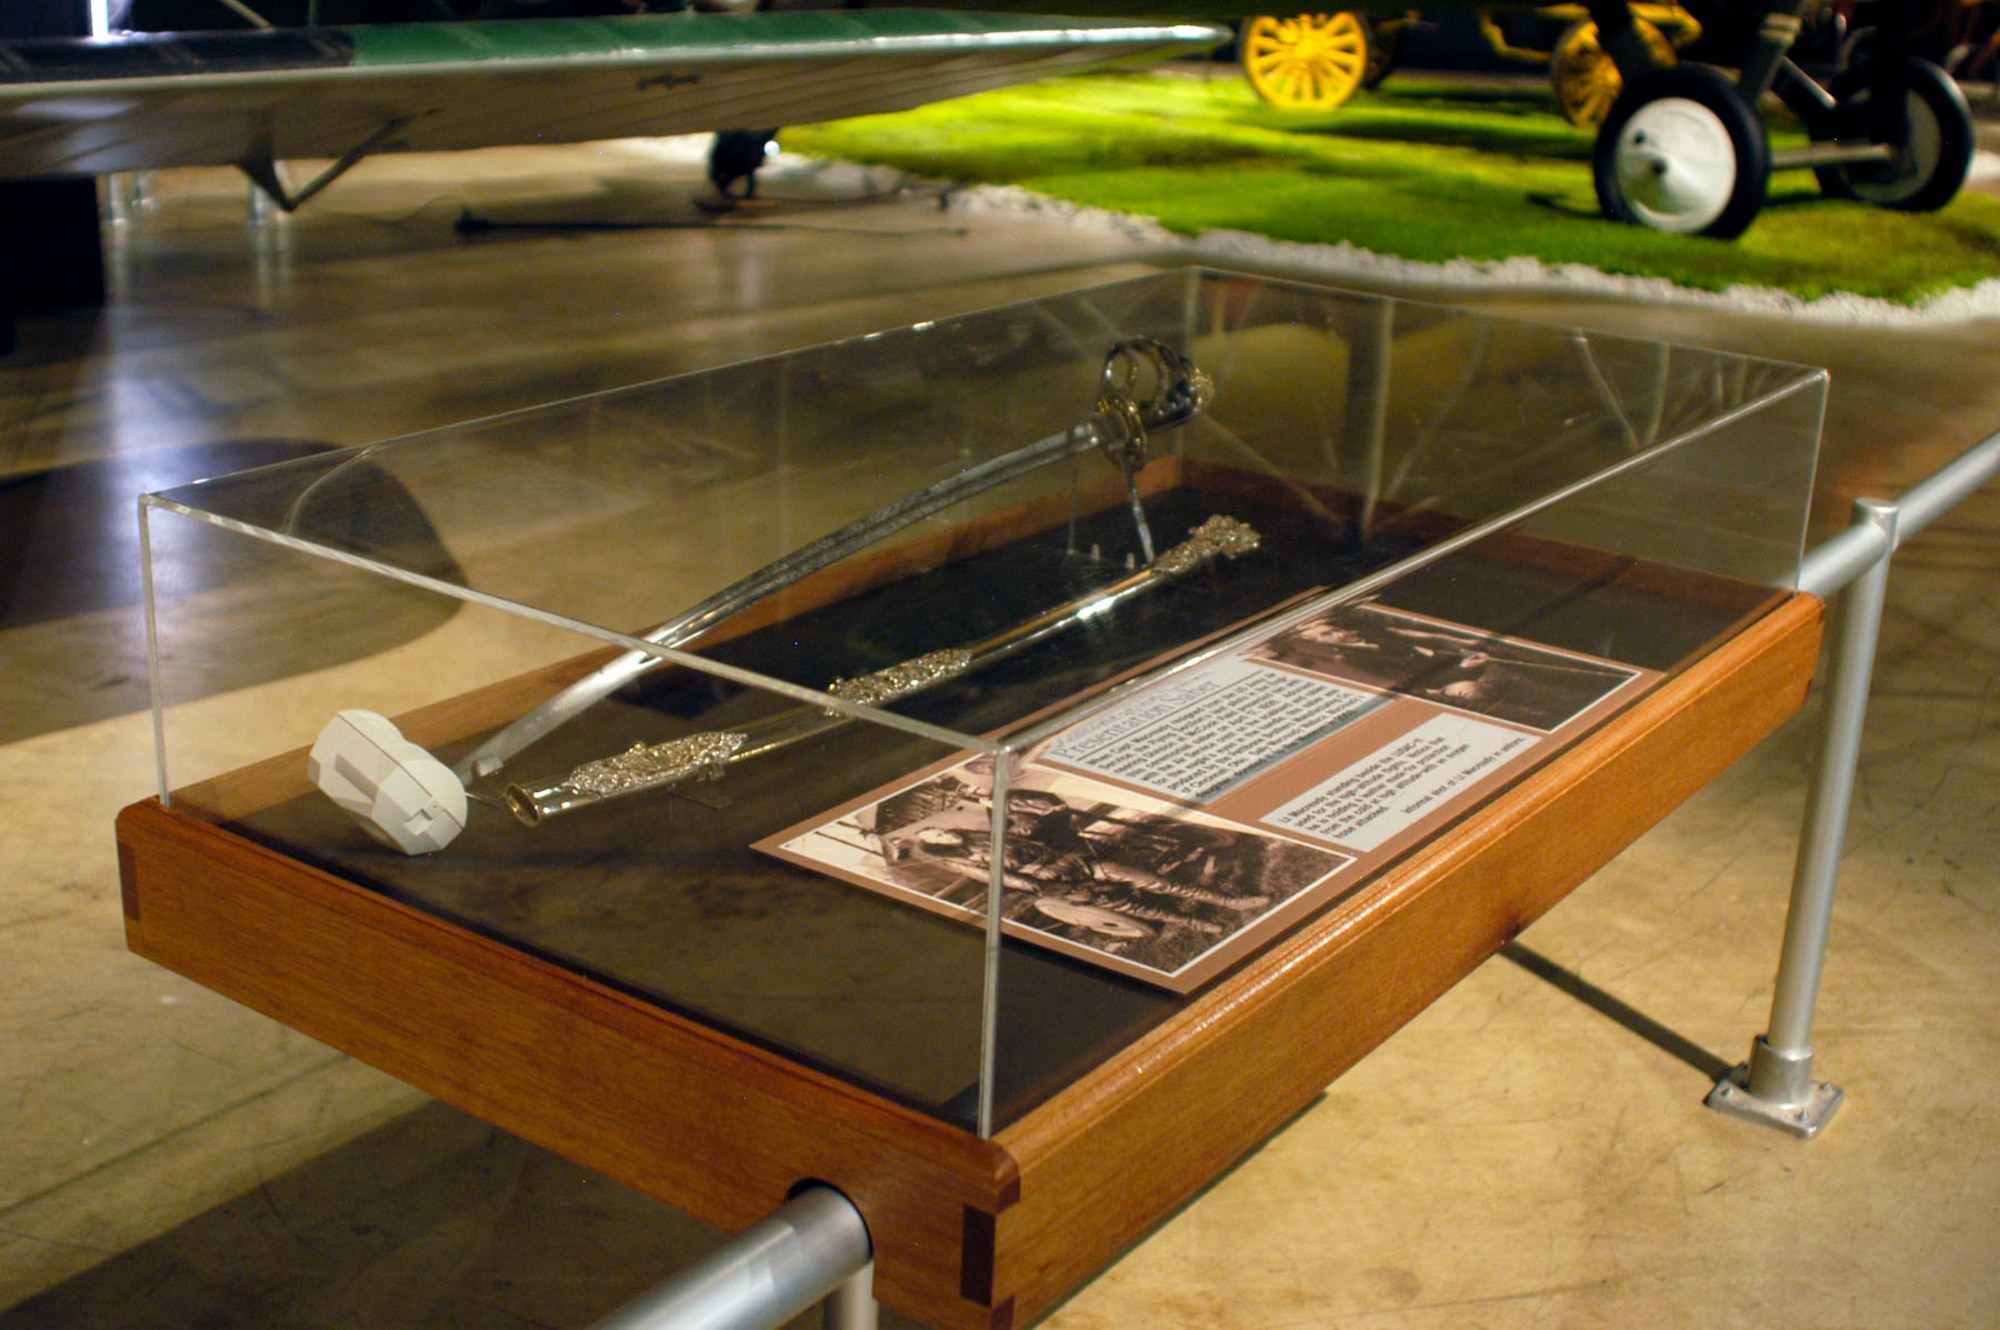 DAYTON, Ohio -- Macready's Presentation Saber on display in the Early Years Gallery at the National Museum of the United States Air Force. (U.S. Air Force photo)